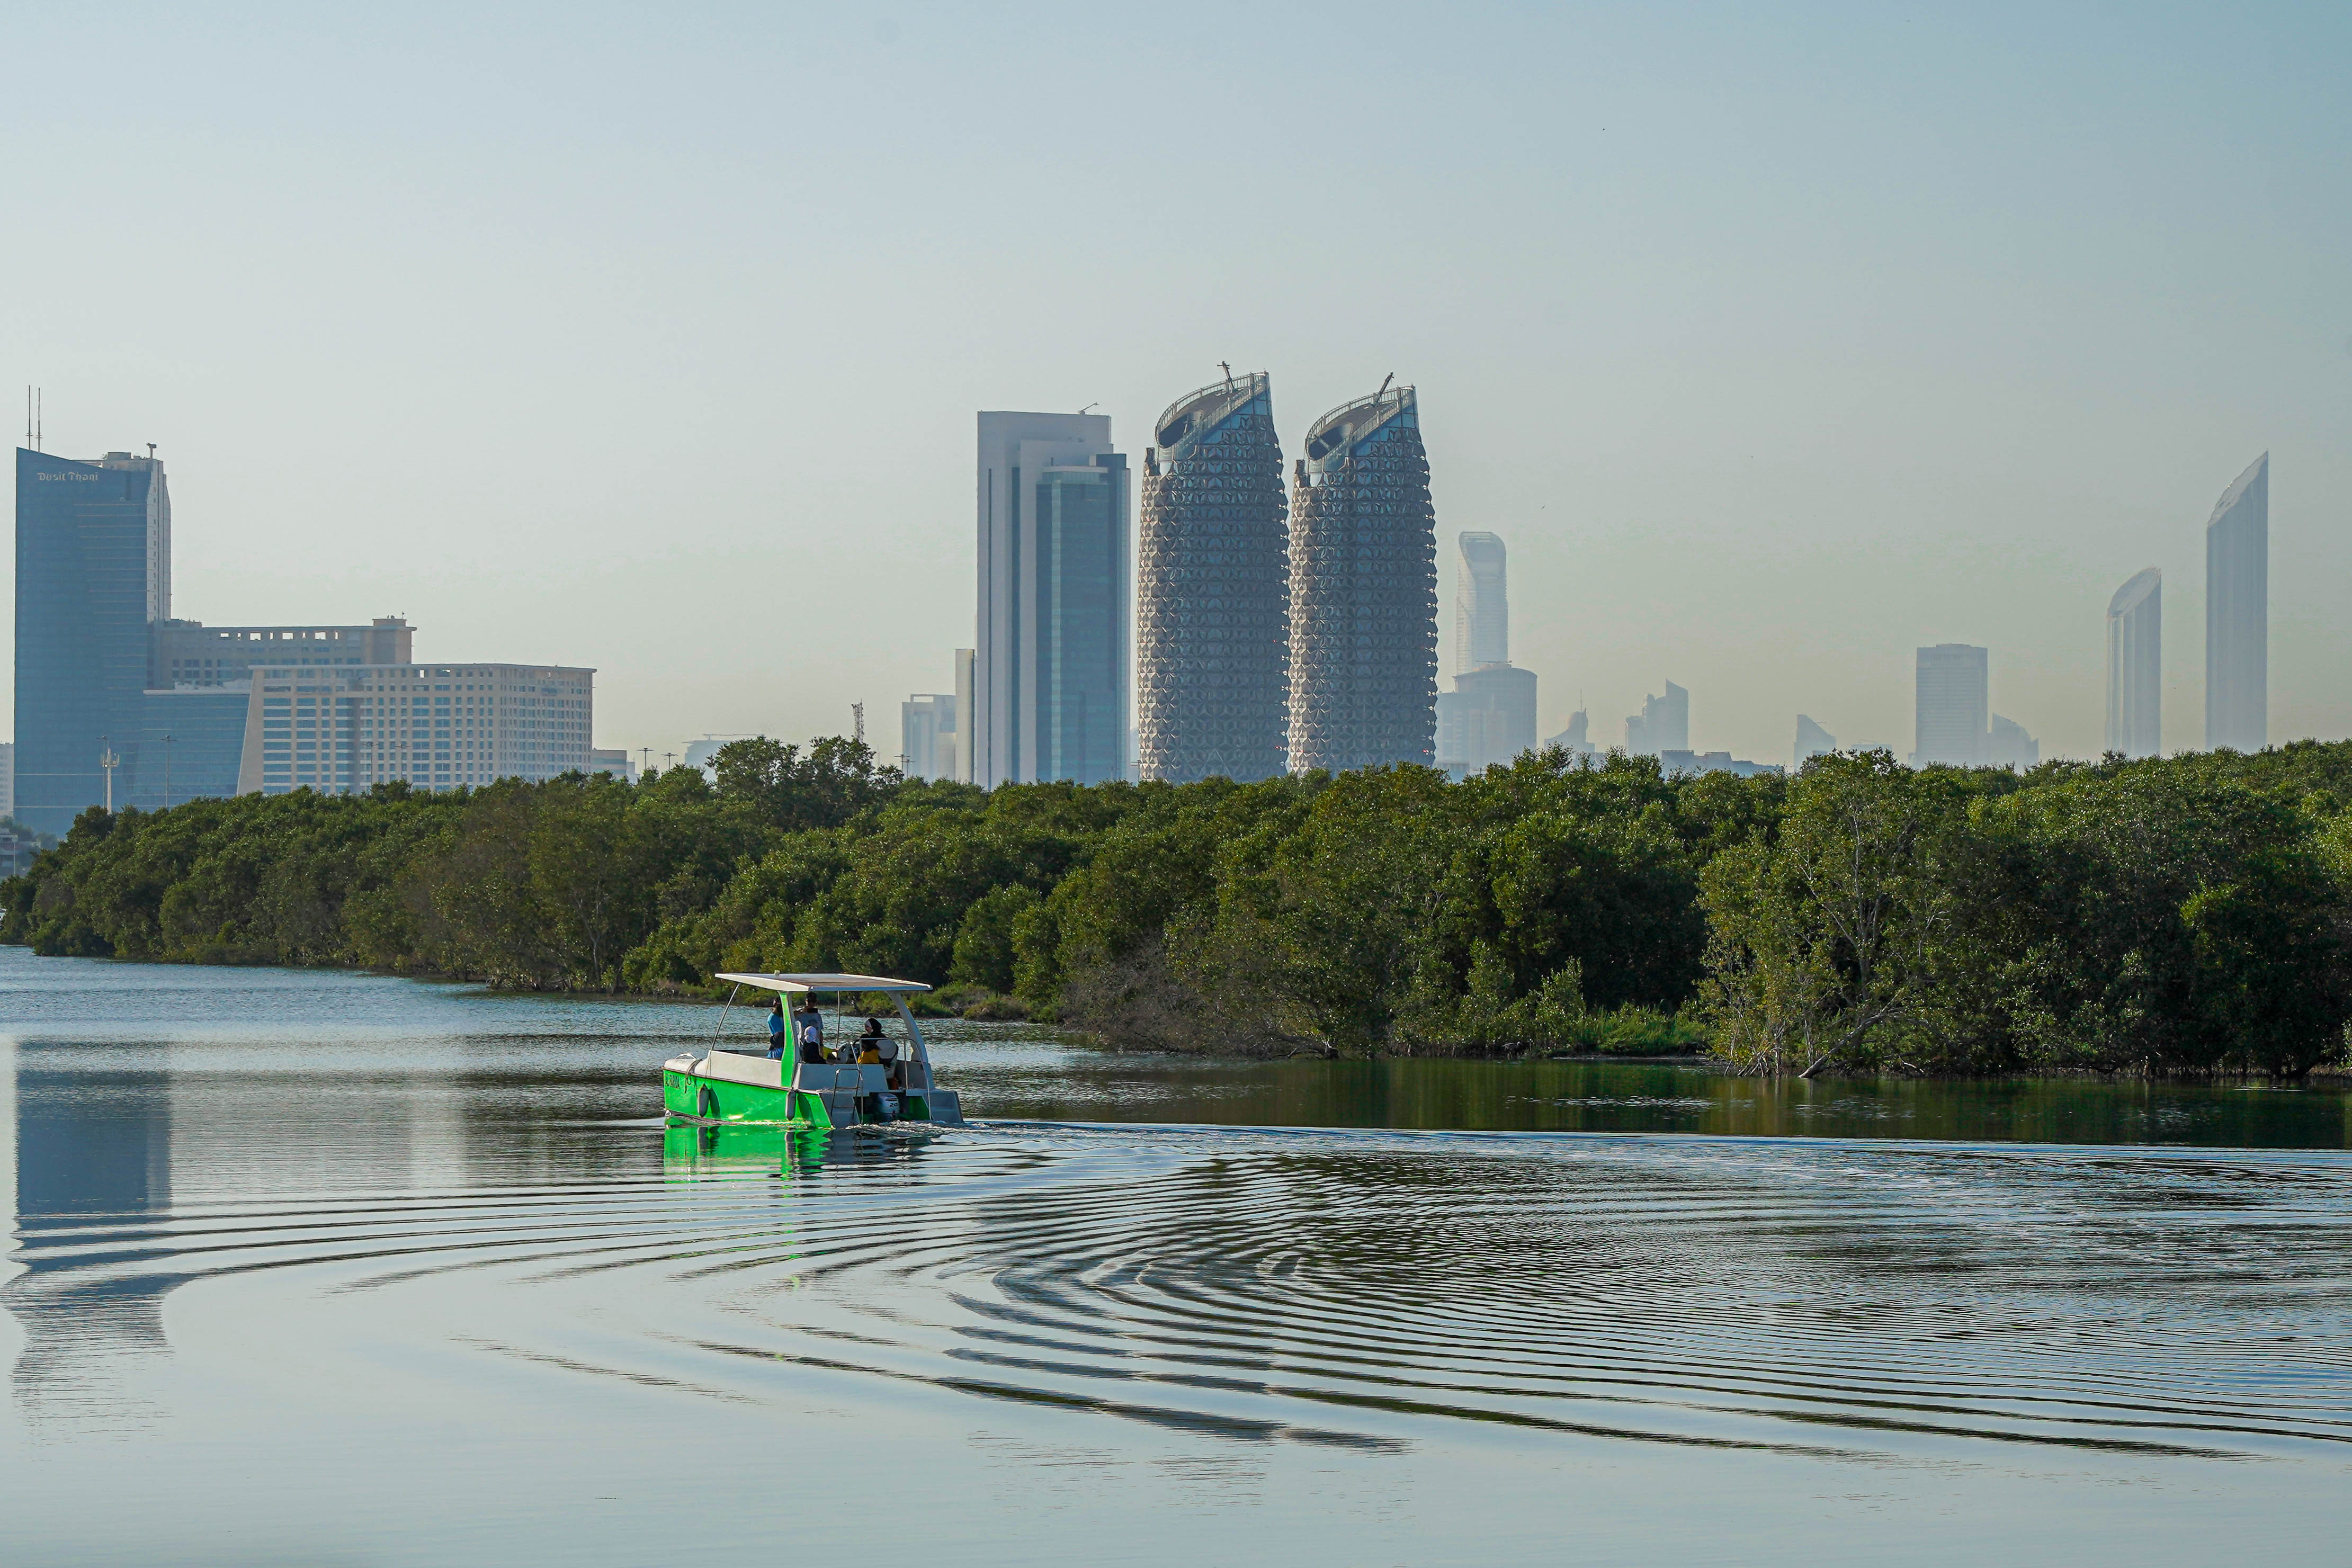 View of the Abu Dhabi skyline and mangroves from the water at Al Gurm Corniche